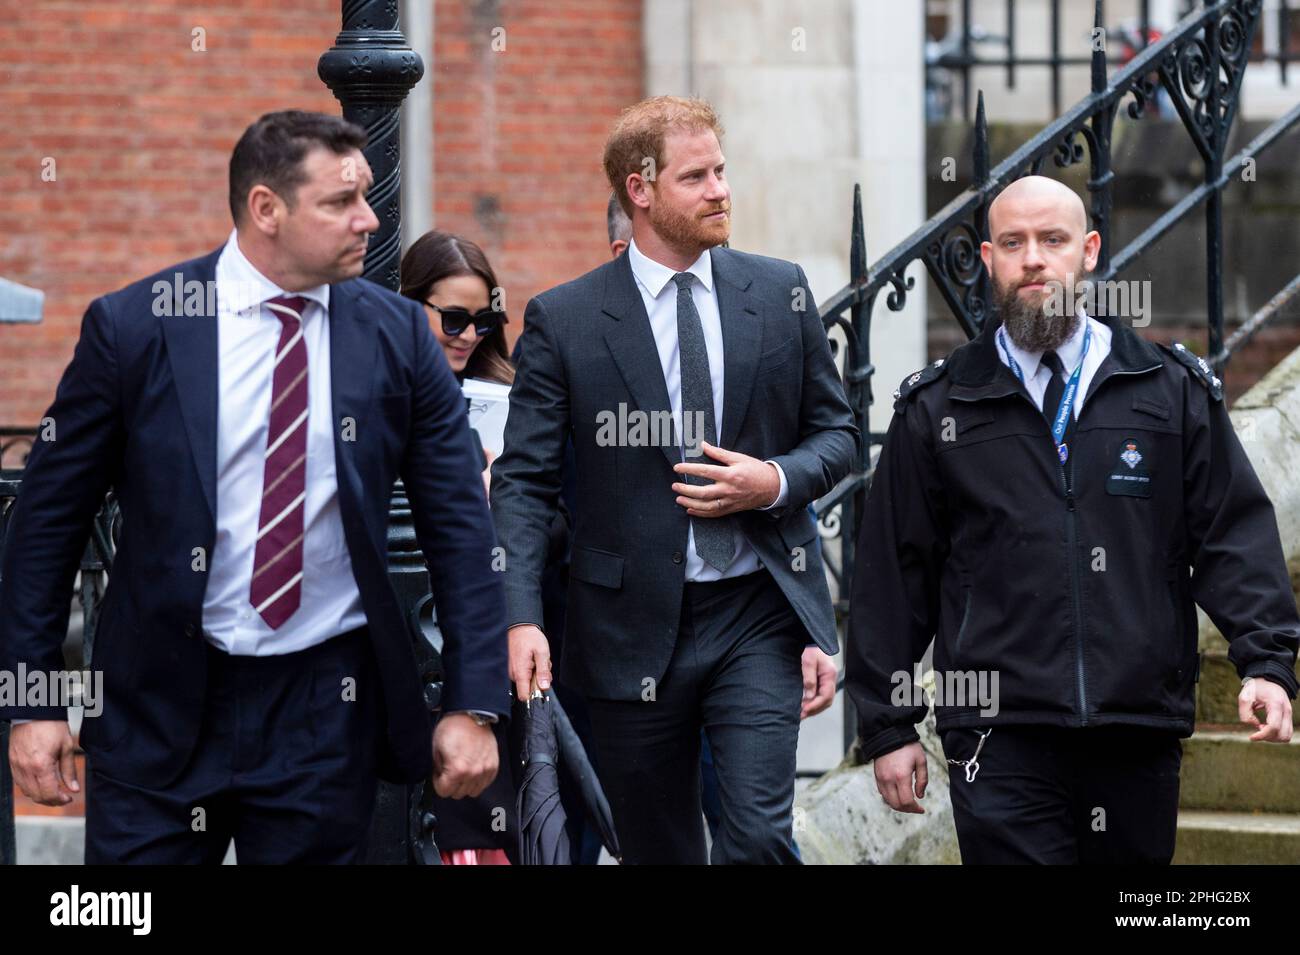 London, UK.  28 March 2023. (C) Prince Harry leaves the High Court on day 2 of a pre-trial hearing.  Seven claimants, Prince Harry, Sir Elton John, David Furnish, Baroness Doreen Lawrence, Sadie Frost Law, Sir Simon Hughes and Elizabeth Hurley, allege serious criminal activity and unlawful information gathering by Associated Newspapers, publisher of the Daily Mail.  Credit: Stephen Chung / Alamy Live News Stock Photo